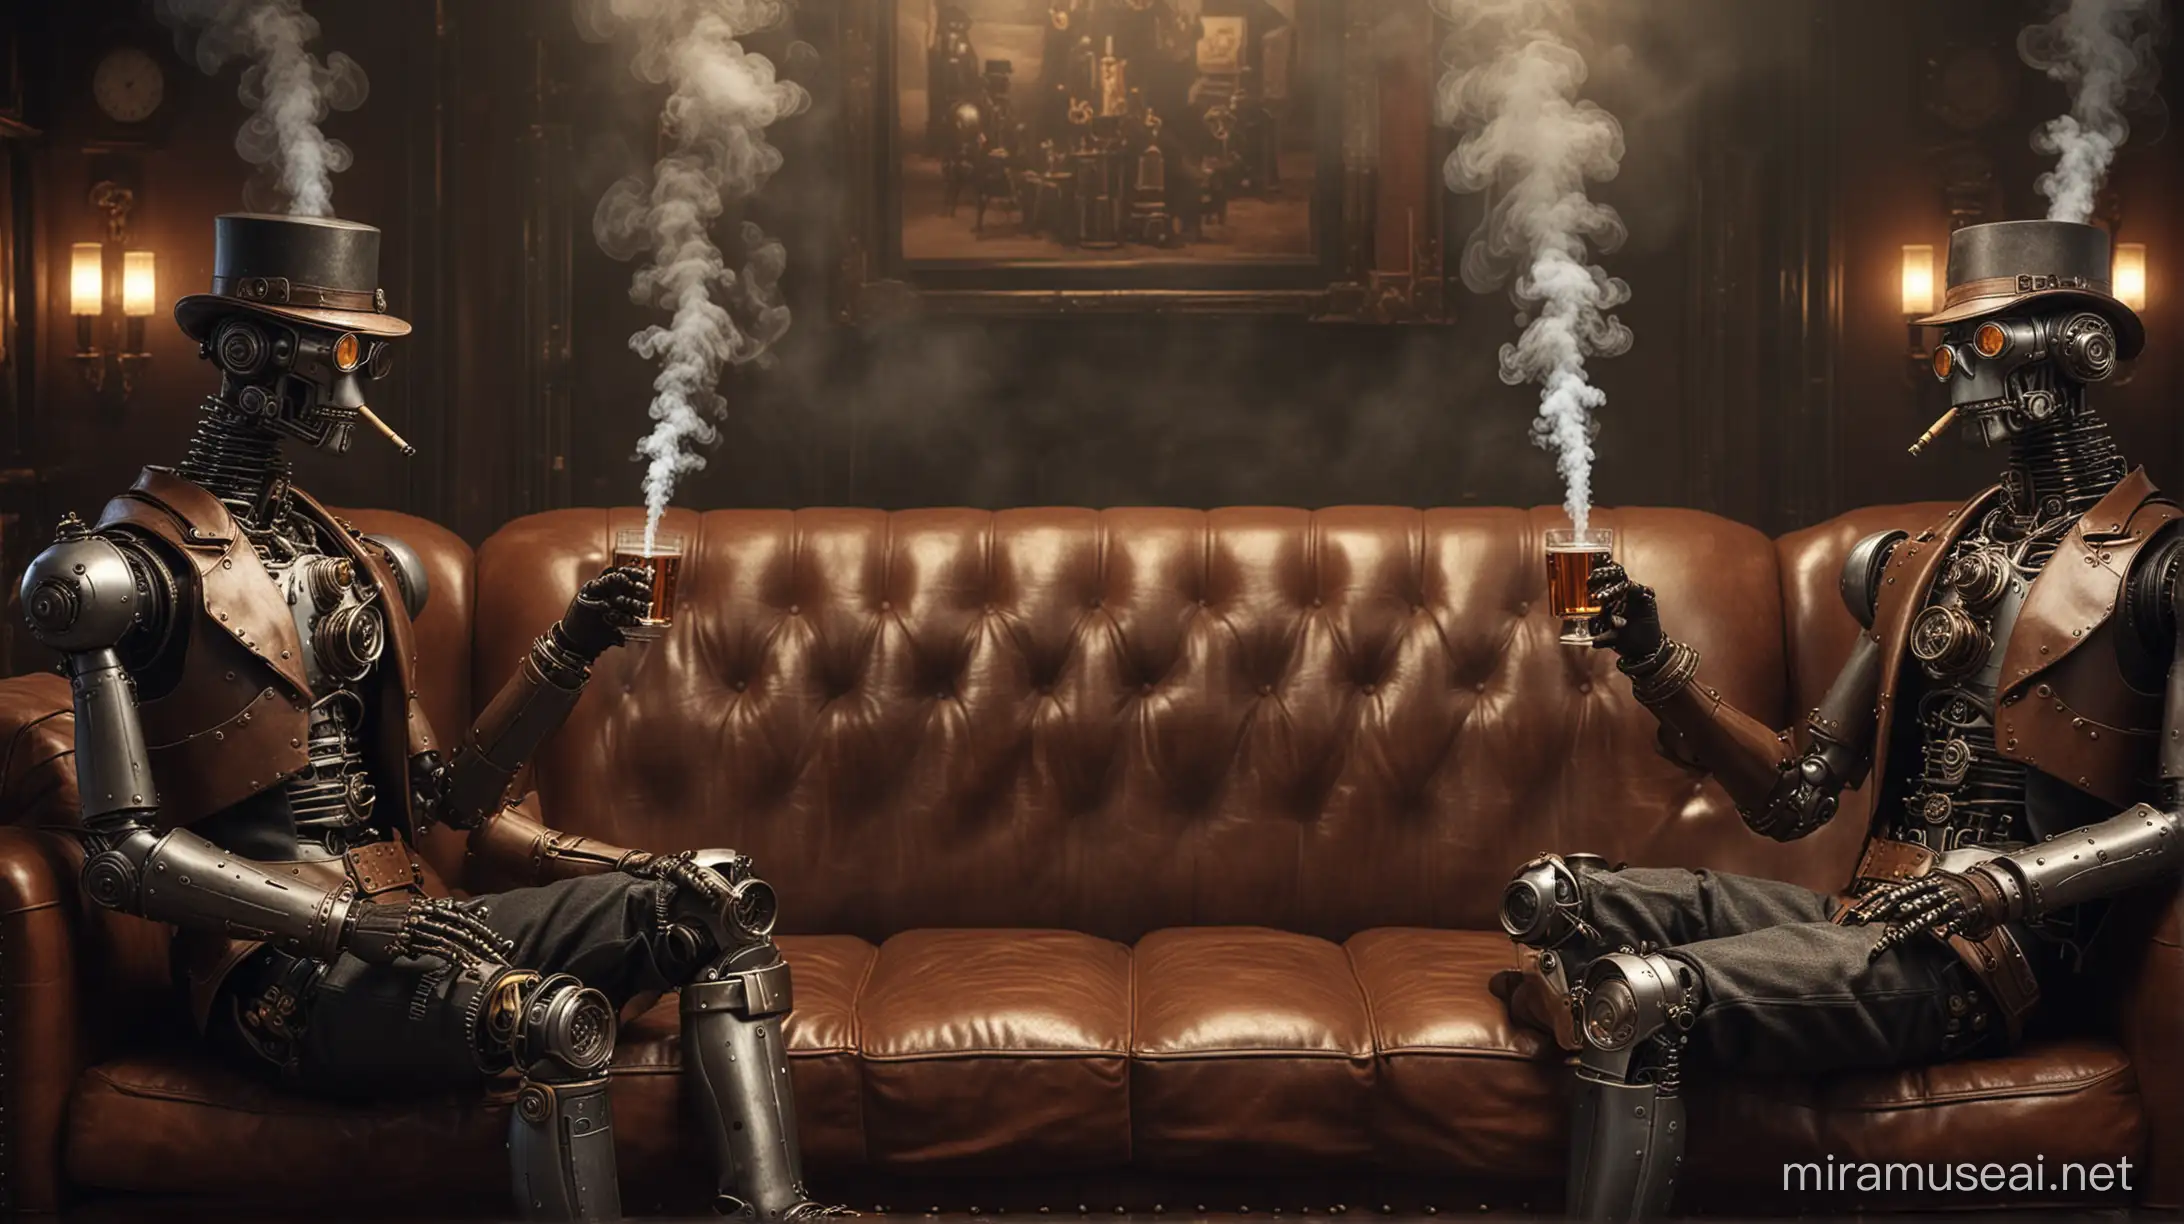 Steampunk Robots Relaxing in a Gentlemens Club Lounge